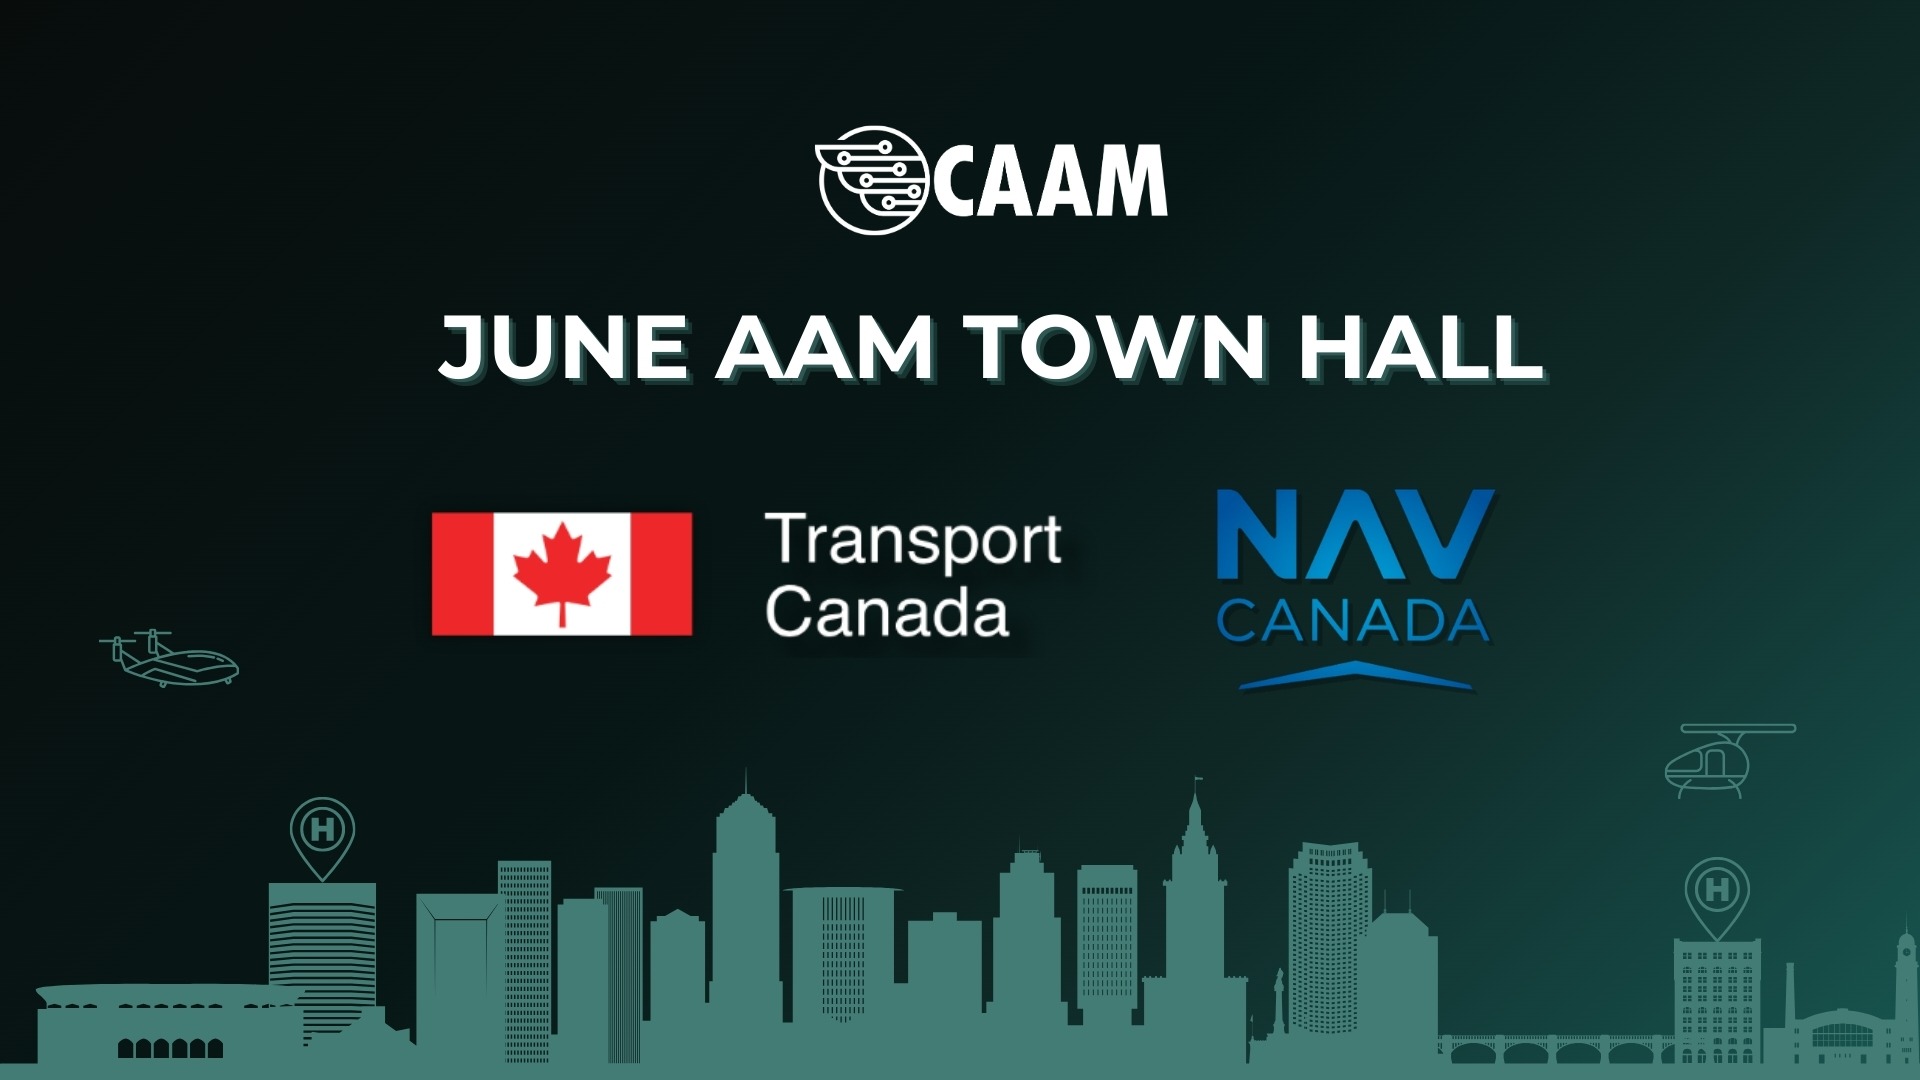 Banner image for CAAM June AAM Town Hall